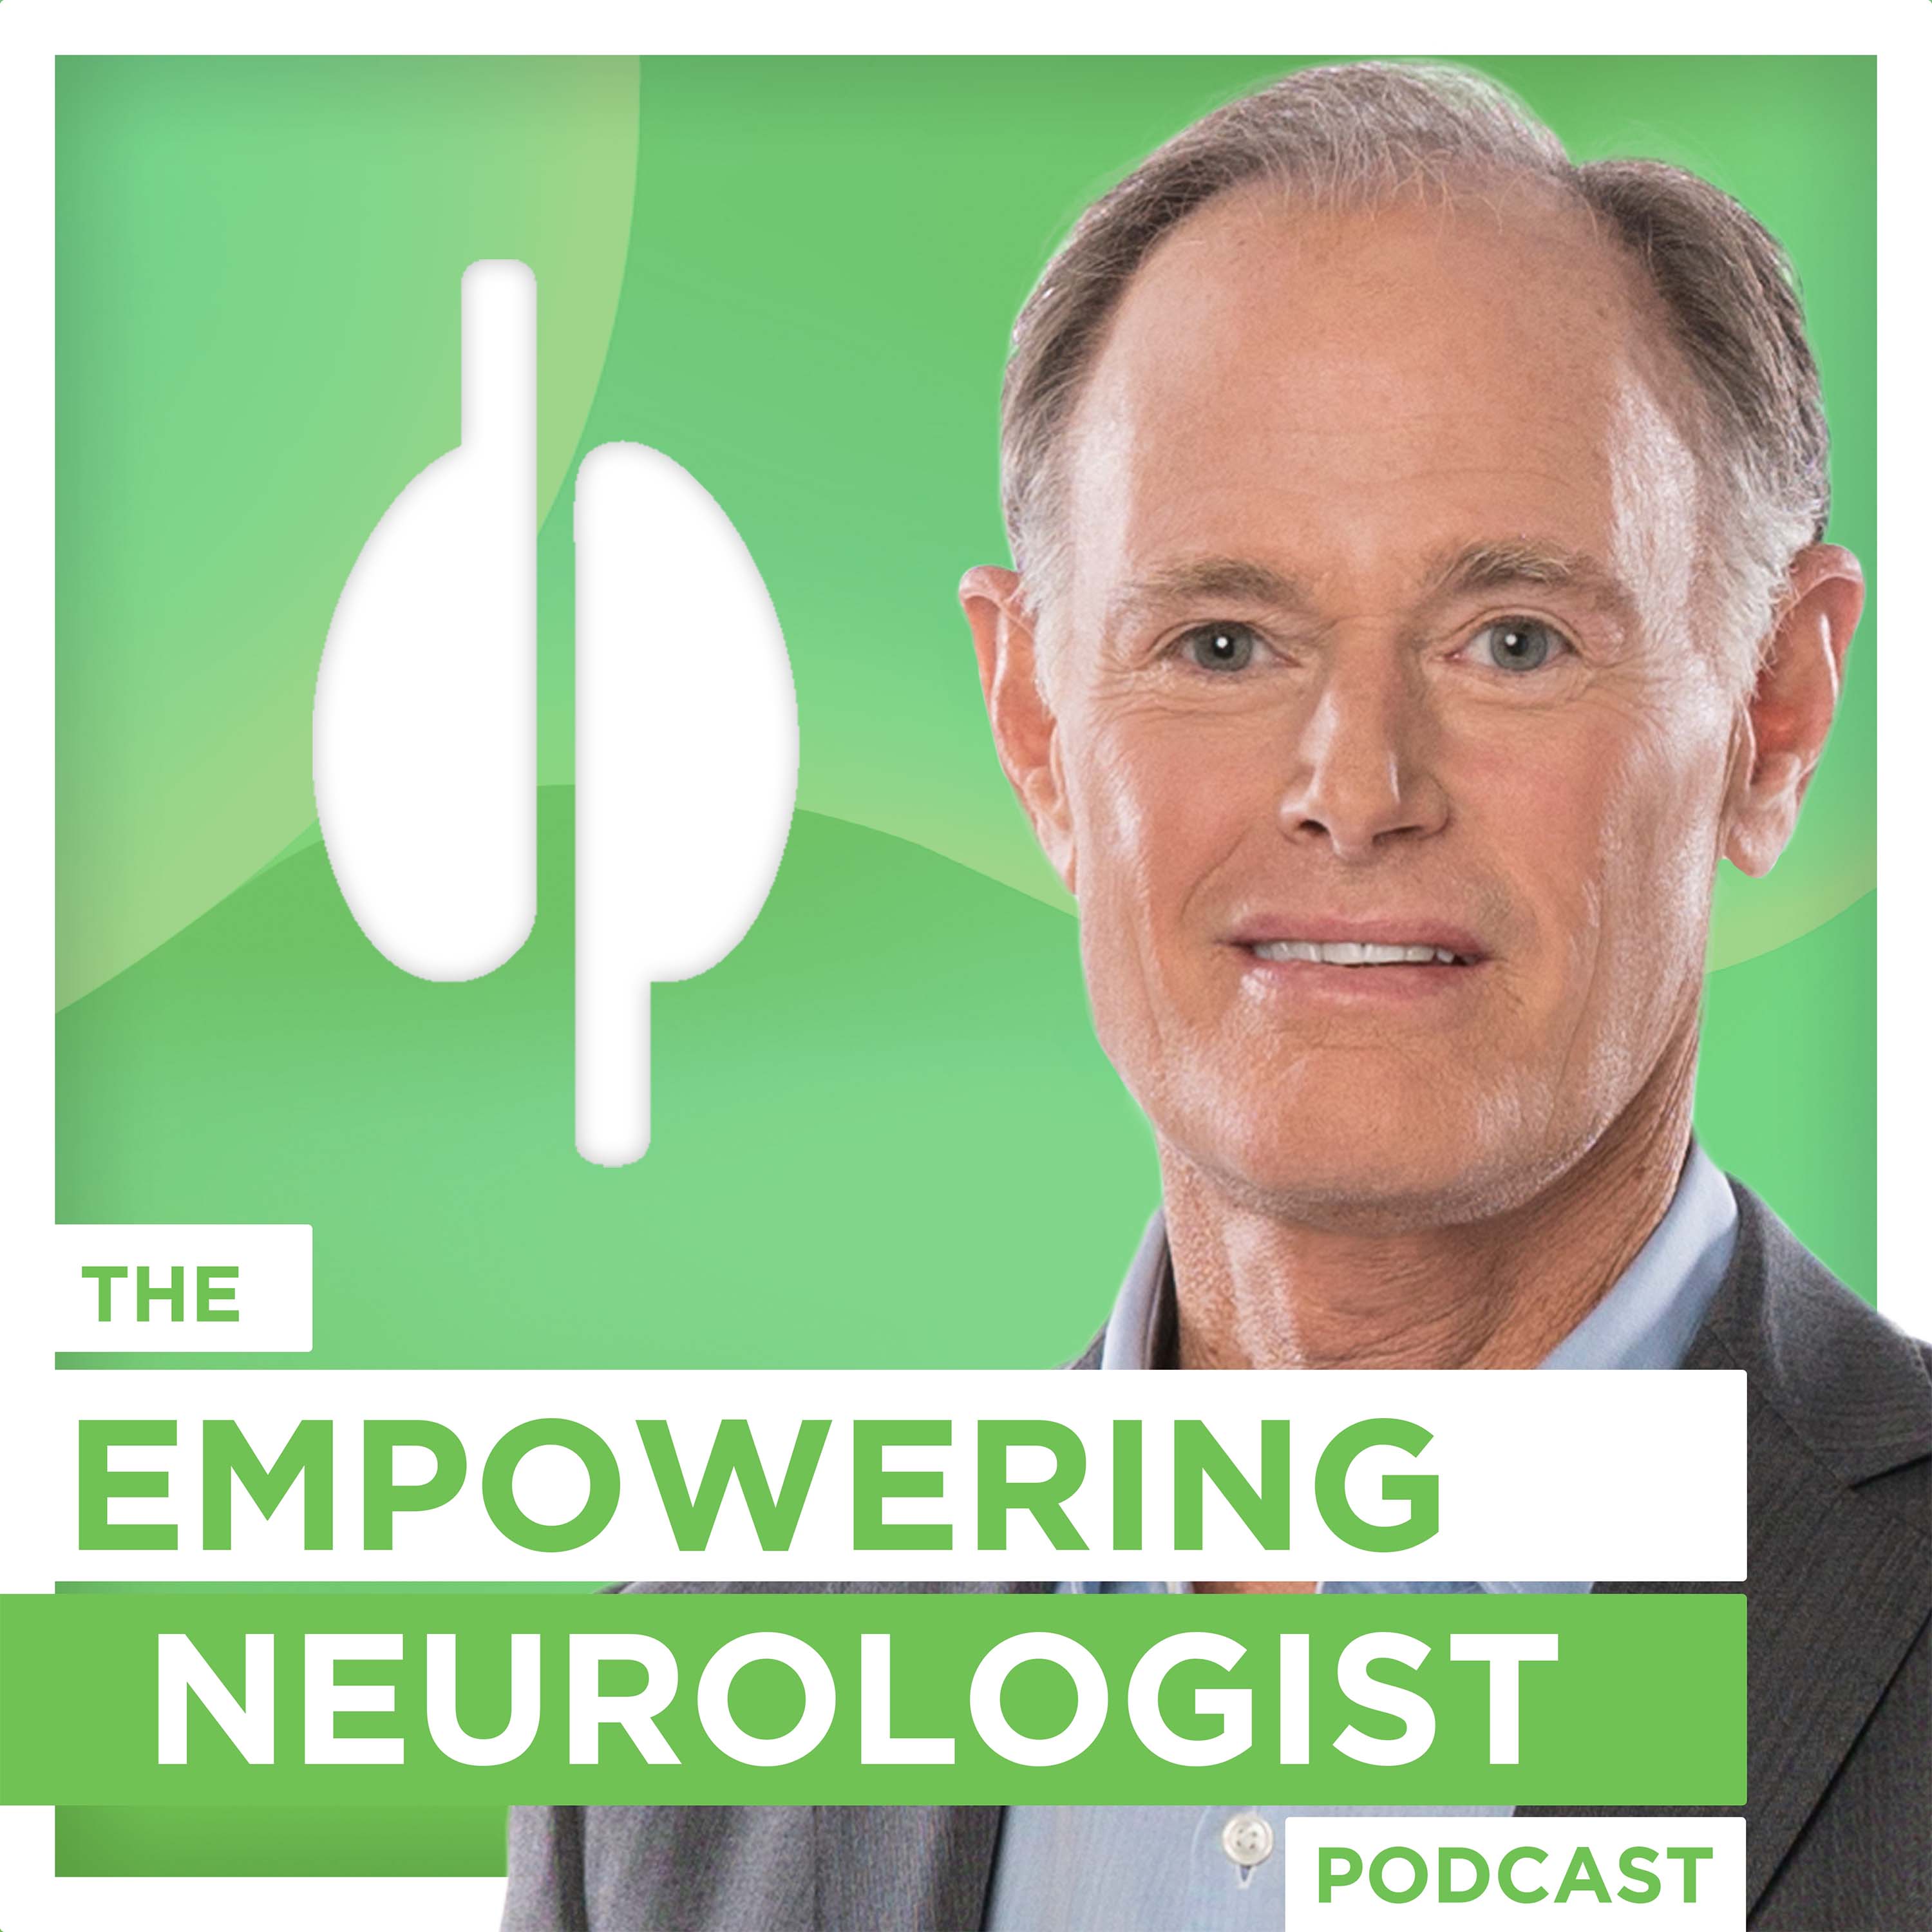 The Joy of Well-Being - with Collen & Jason Wachob | The Empowering Neurologist EP. 164